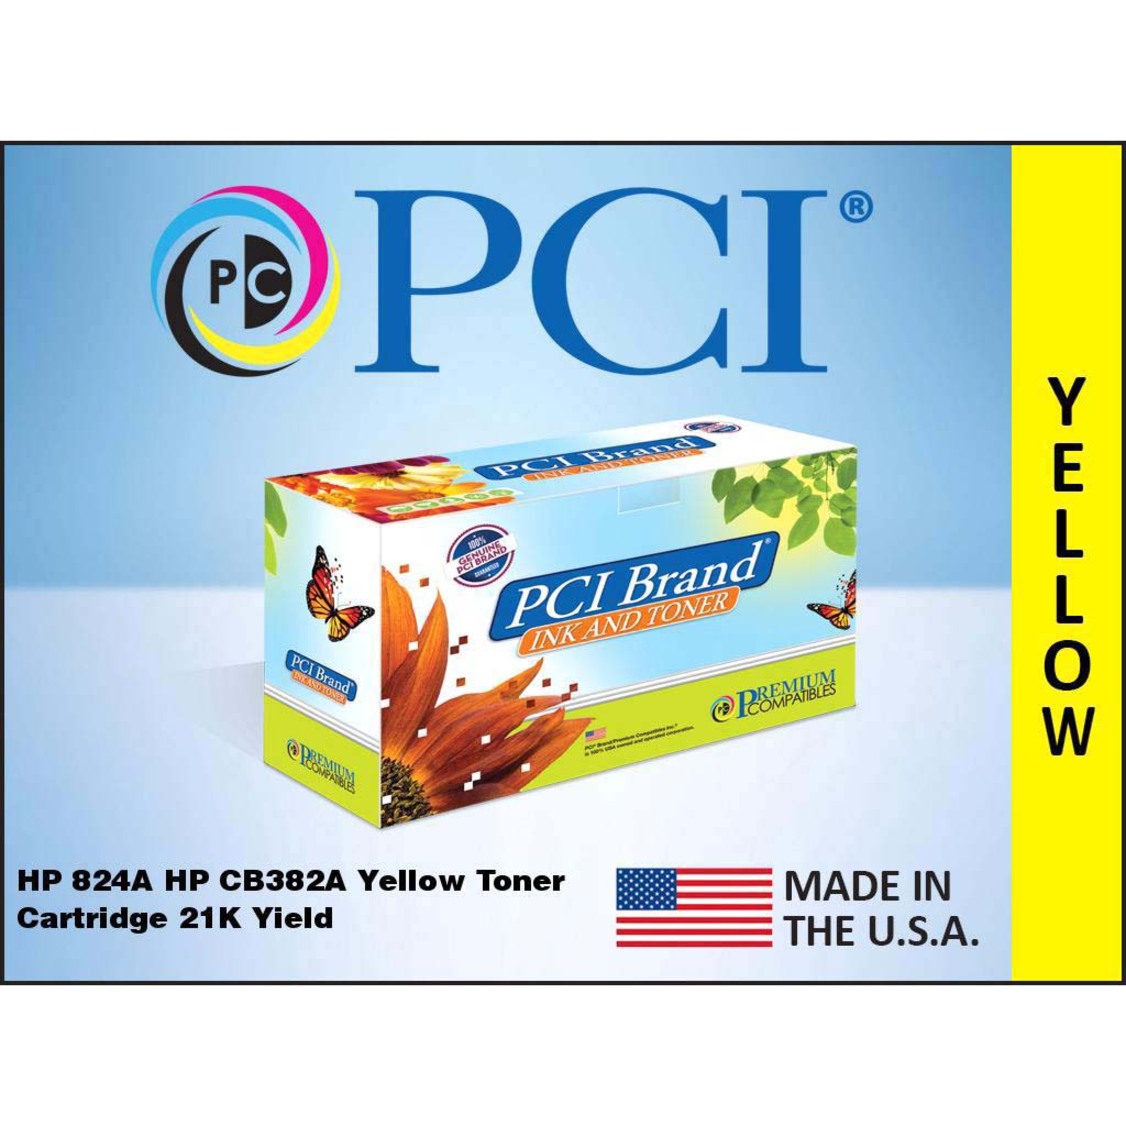 Premium Compatibles CB382ARPC HP 824A Yellow Toner Ctg 21K Yield Made in the USA for CM6030 CM6040, Laser Printer Cartridge